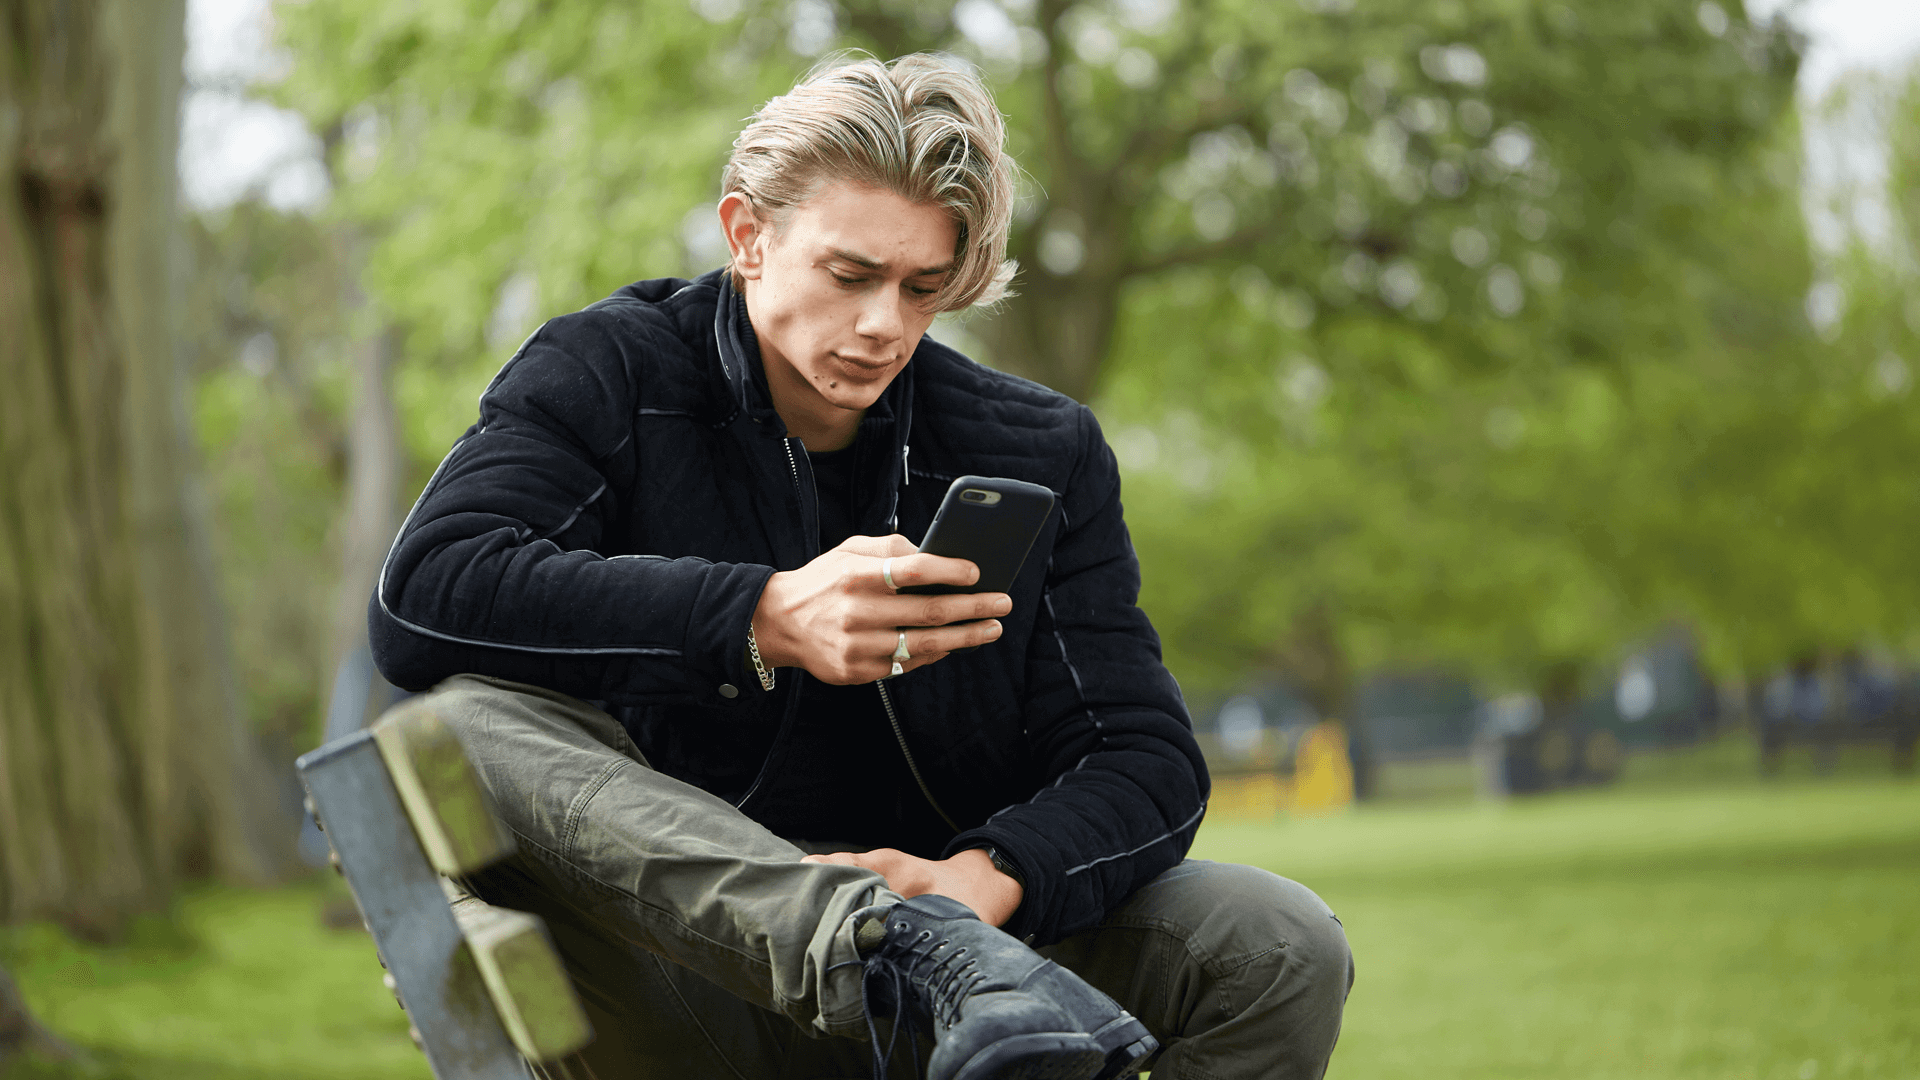 A young man wearing a black jacket sits on a park bench. He is looking at his phone with a worried expression.